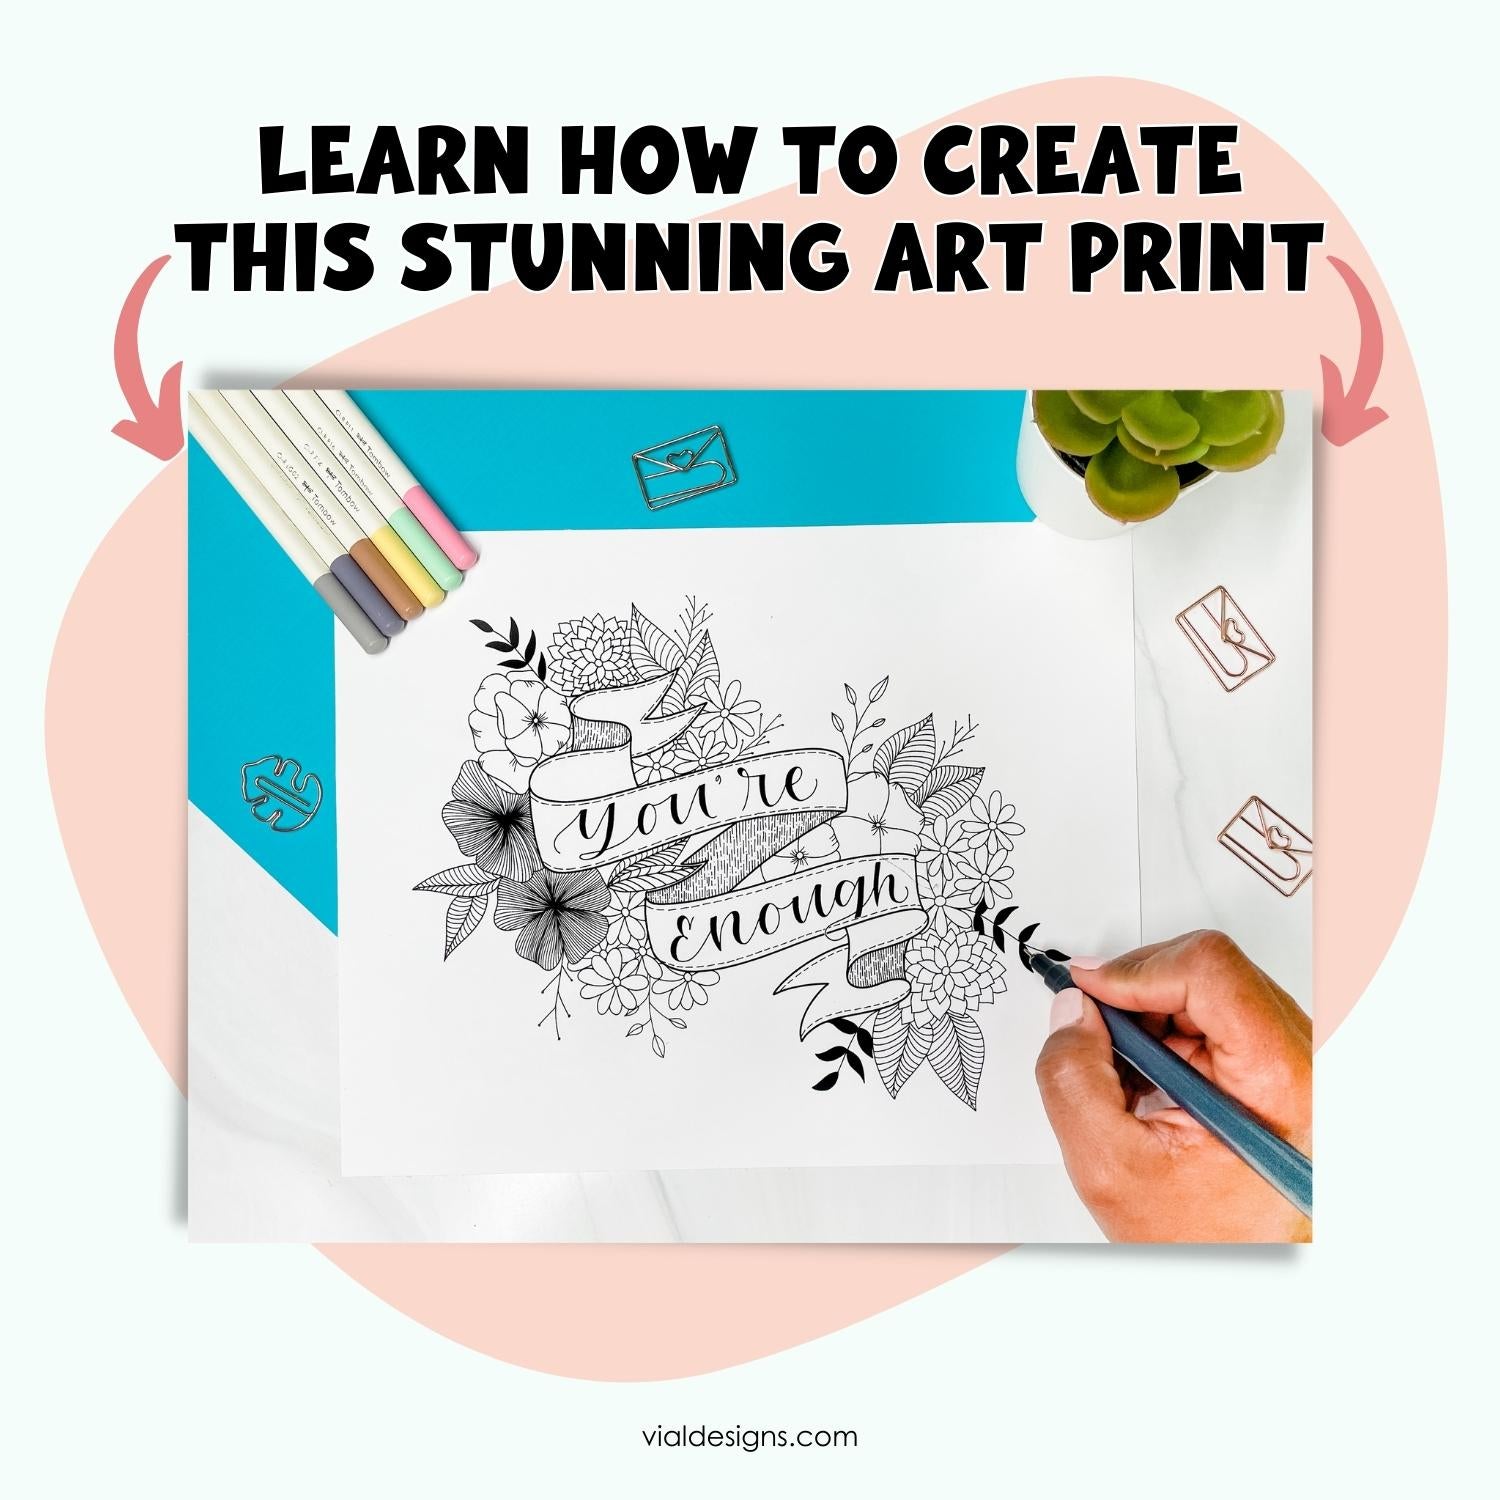 learn how to create a beautiful art print with flower doodles and an intricate banner